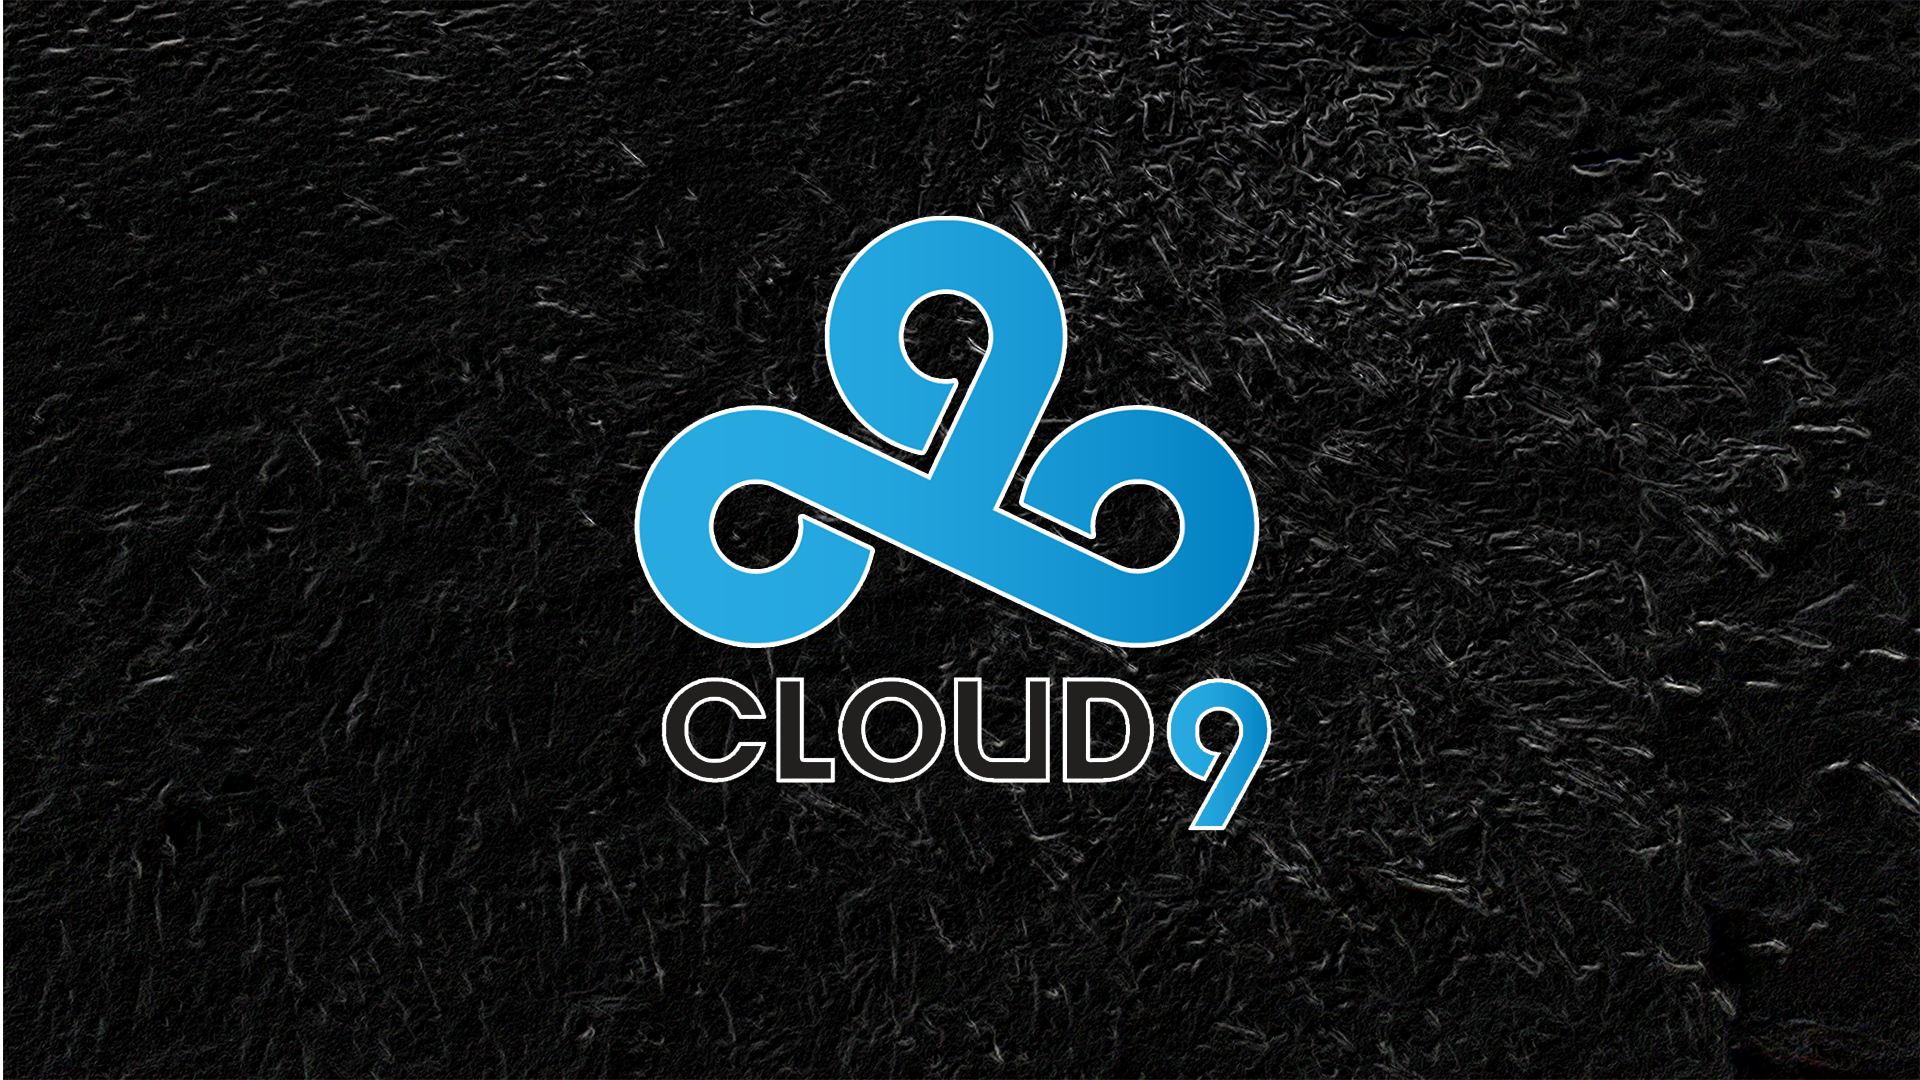 Cloud9 Cs Go And Lol Wallpaper HD By Toskevdesing